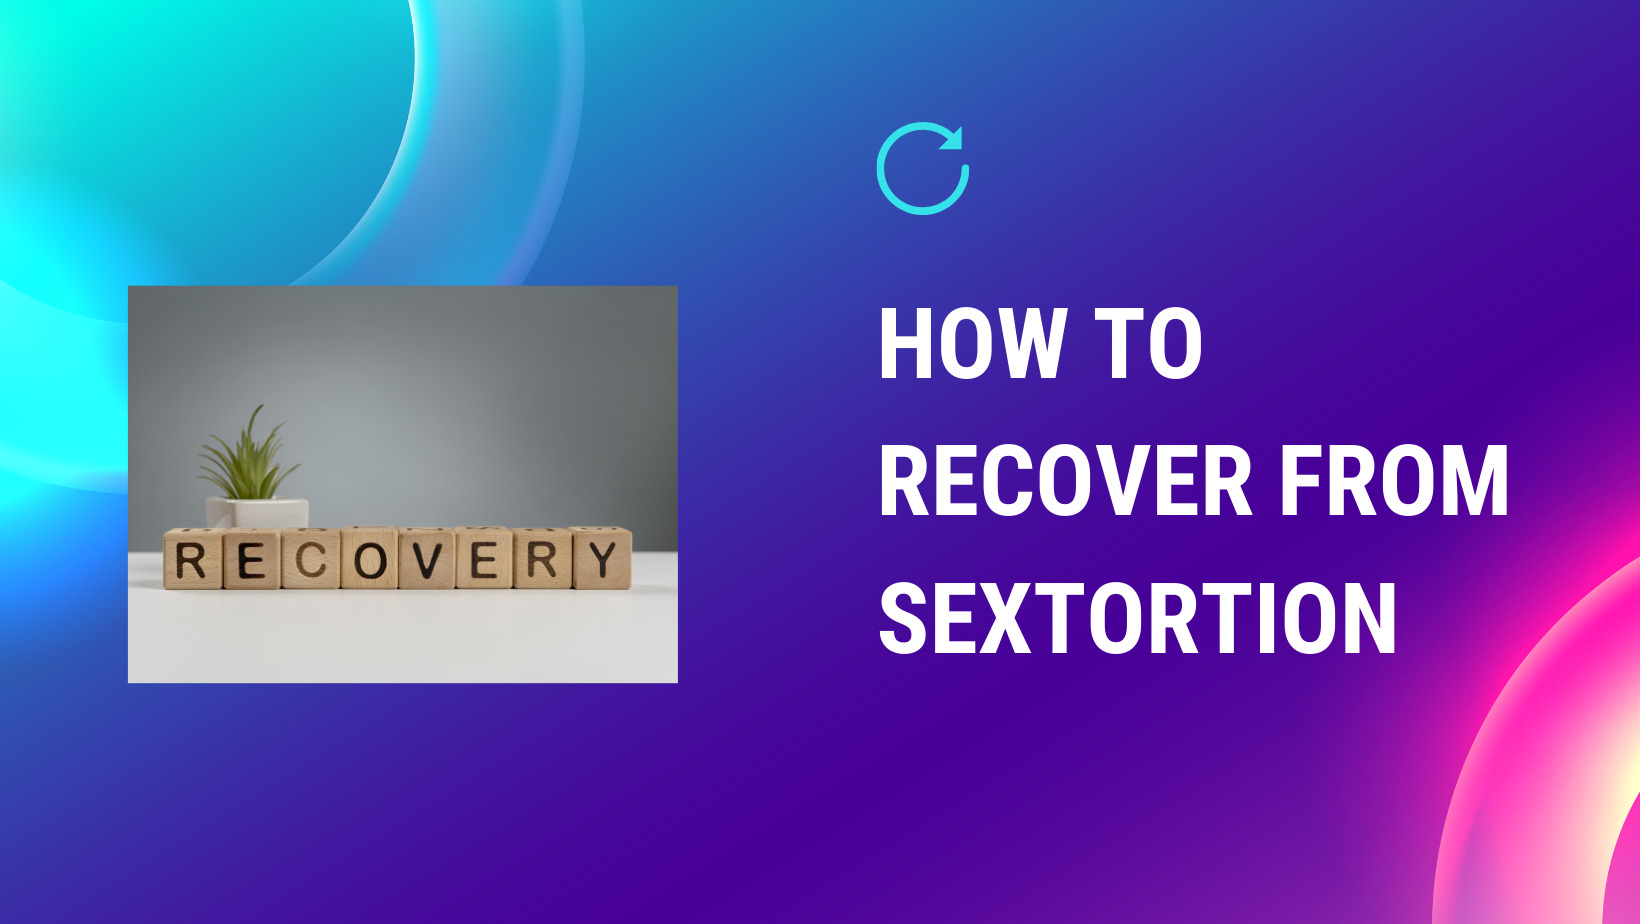 how to recover from sextortion